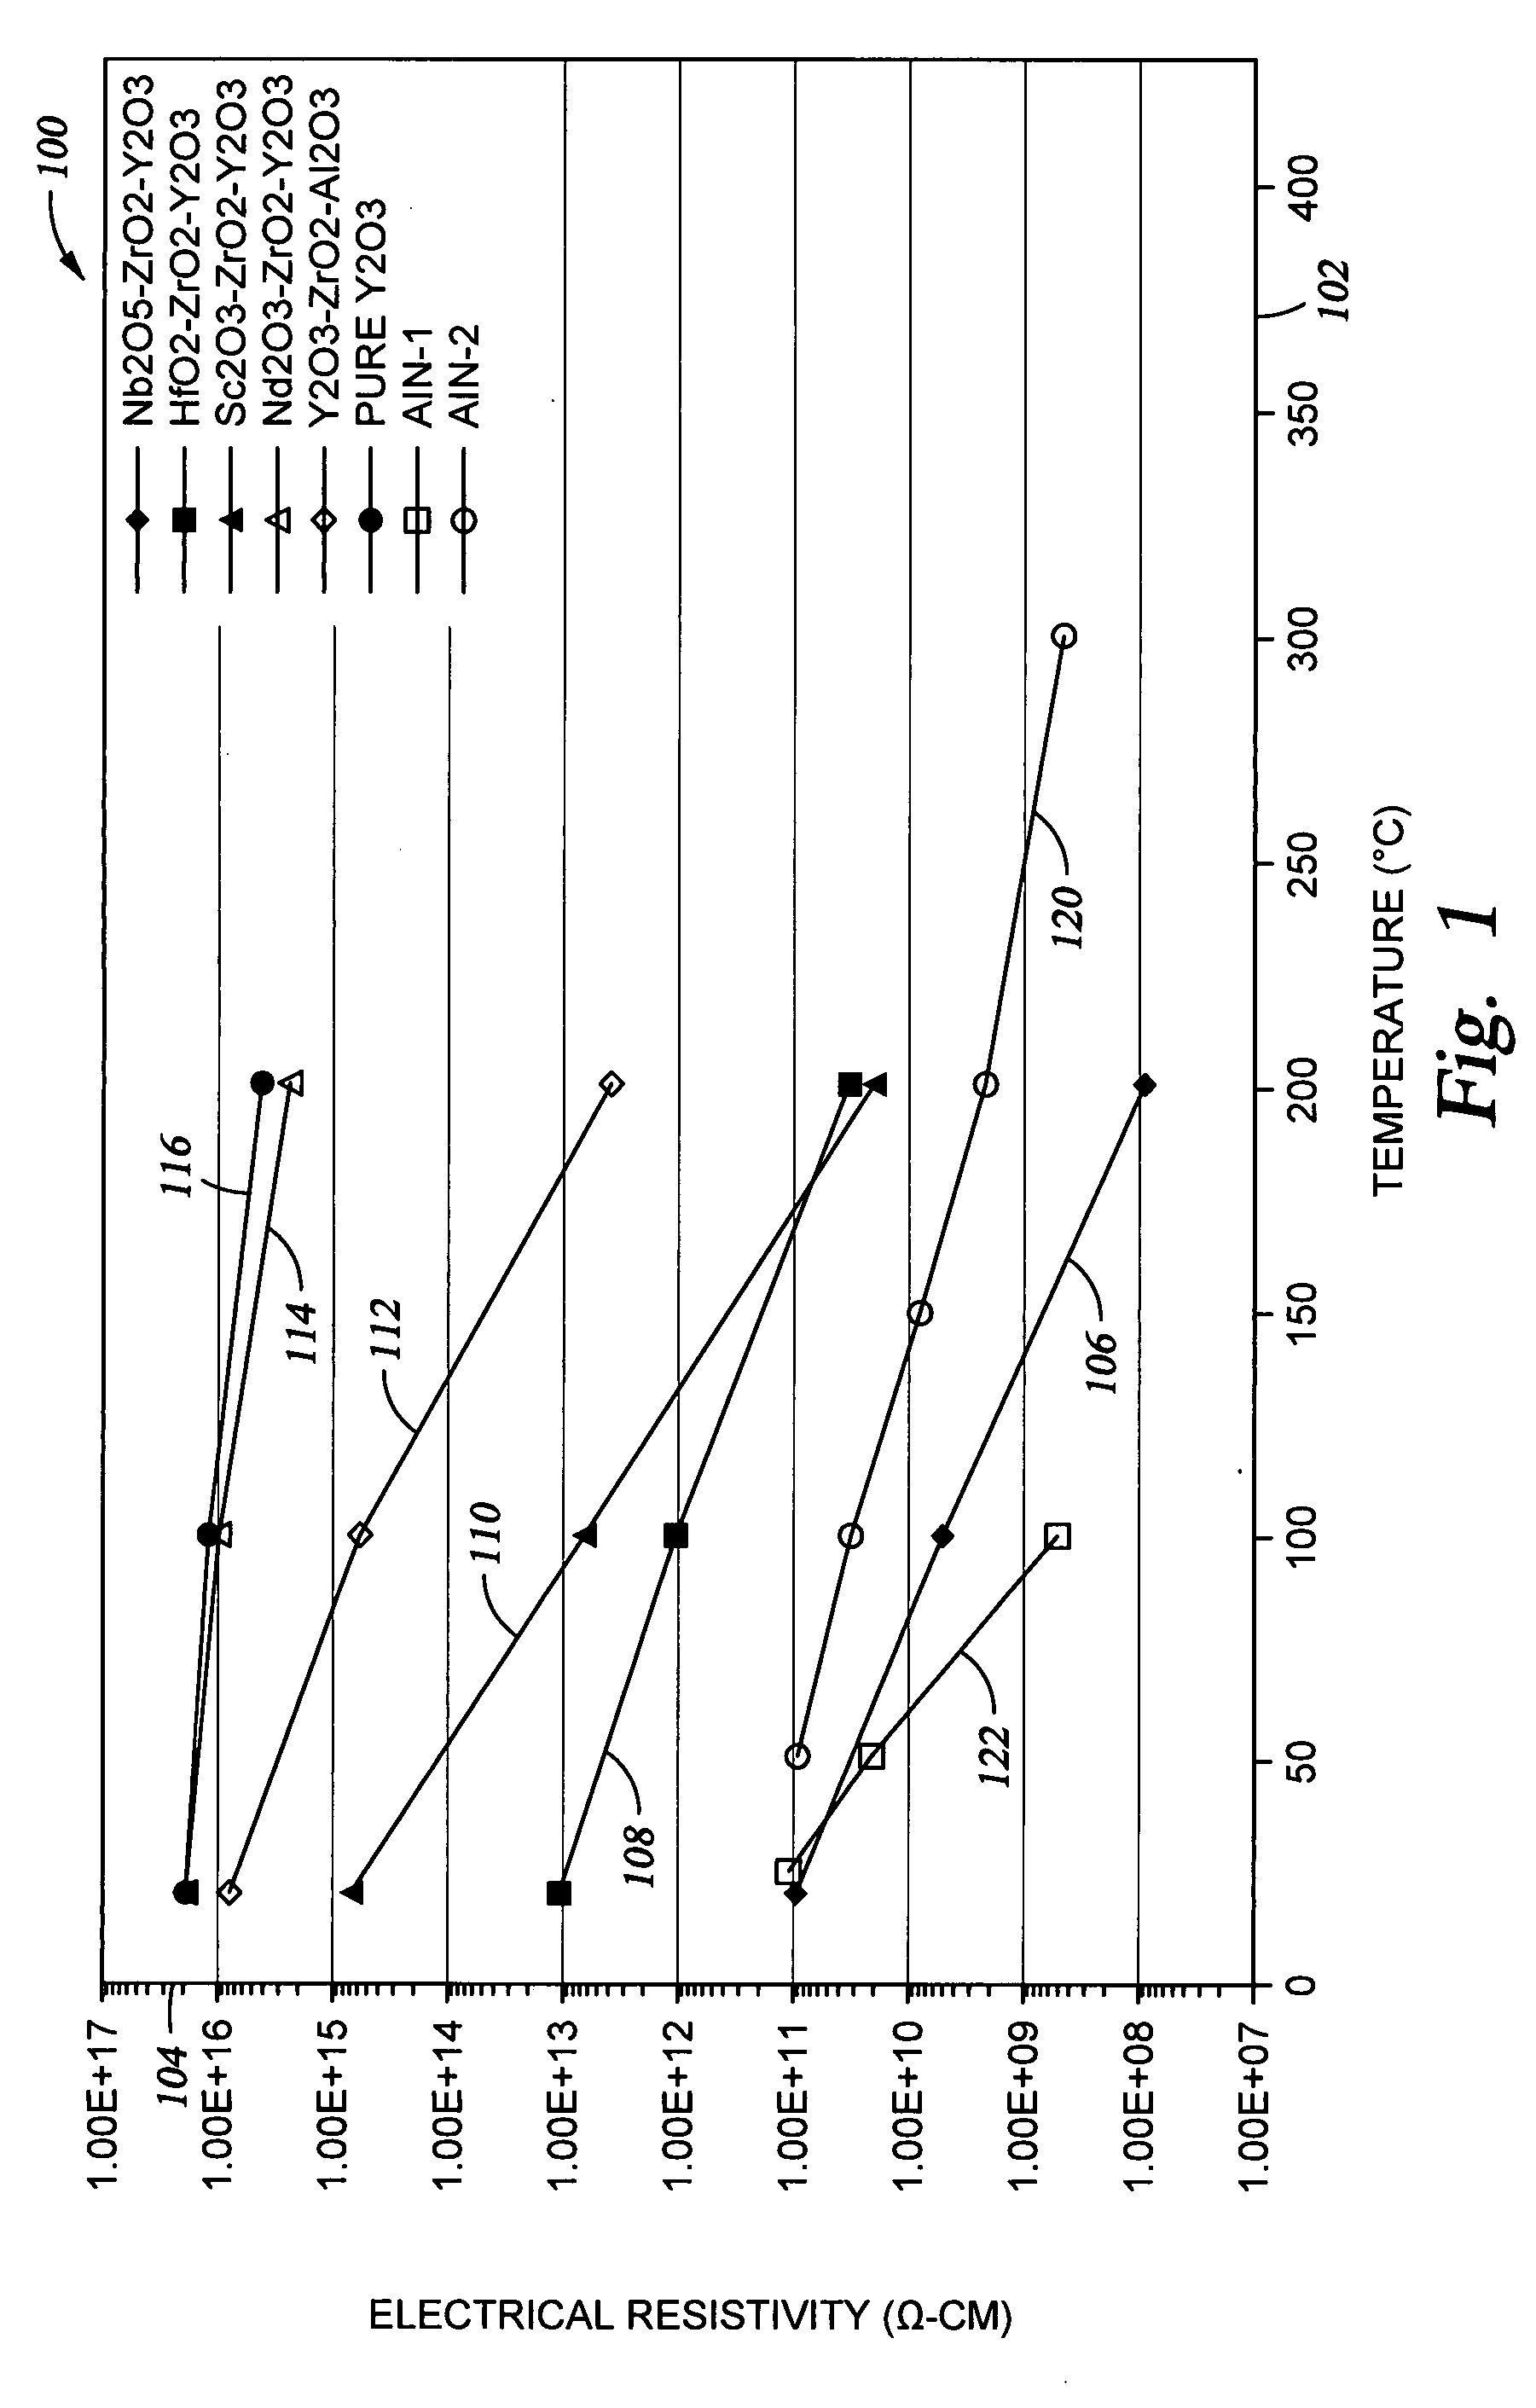 Method of coating semiconductor processing apparatus with protective yttrium-containing coatings